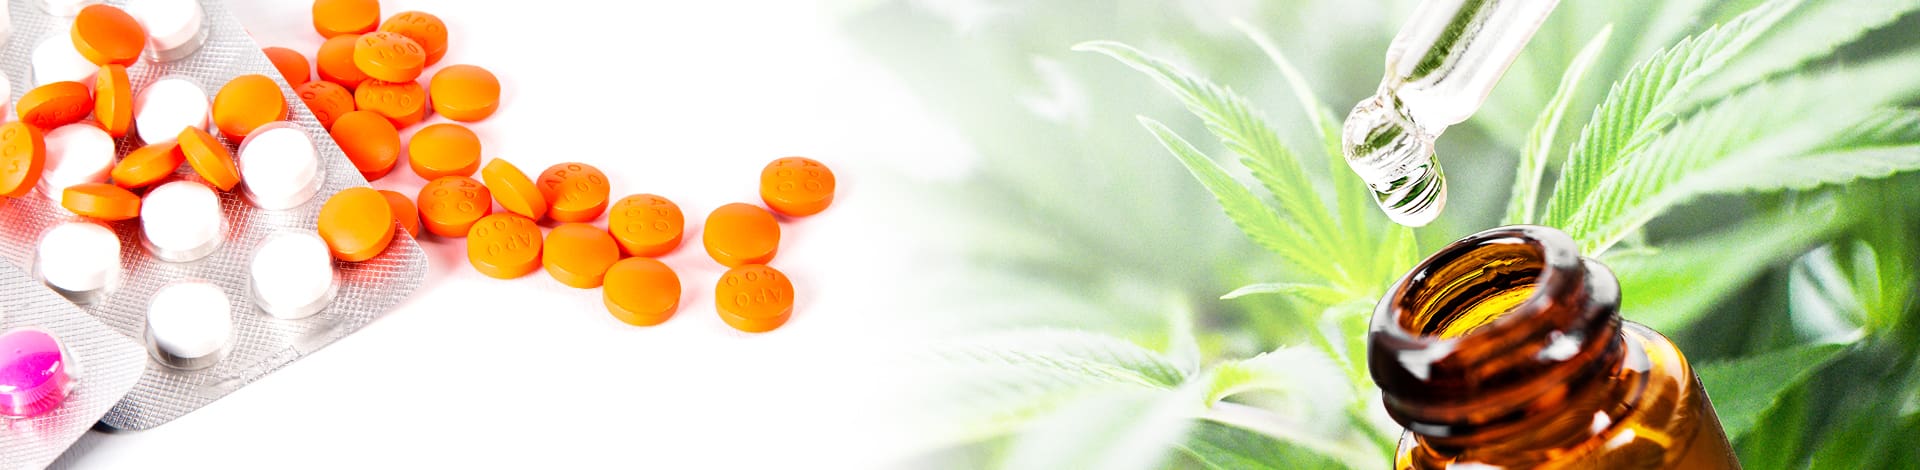 What Medications May CBD Interact With?